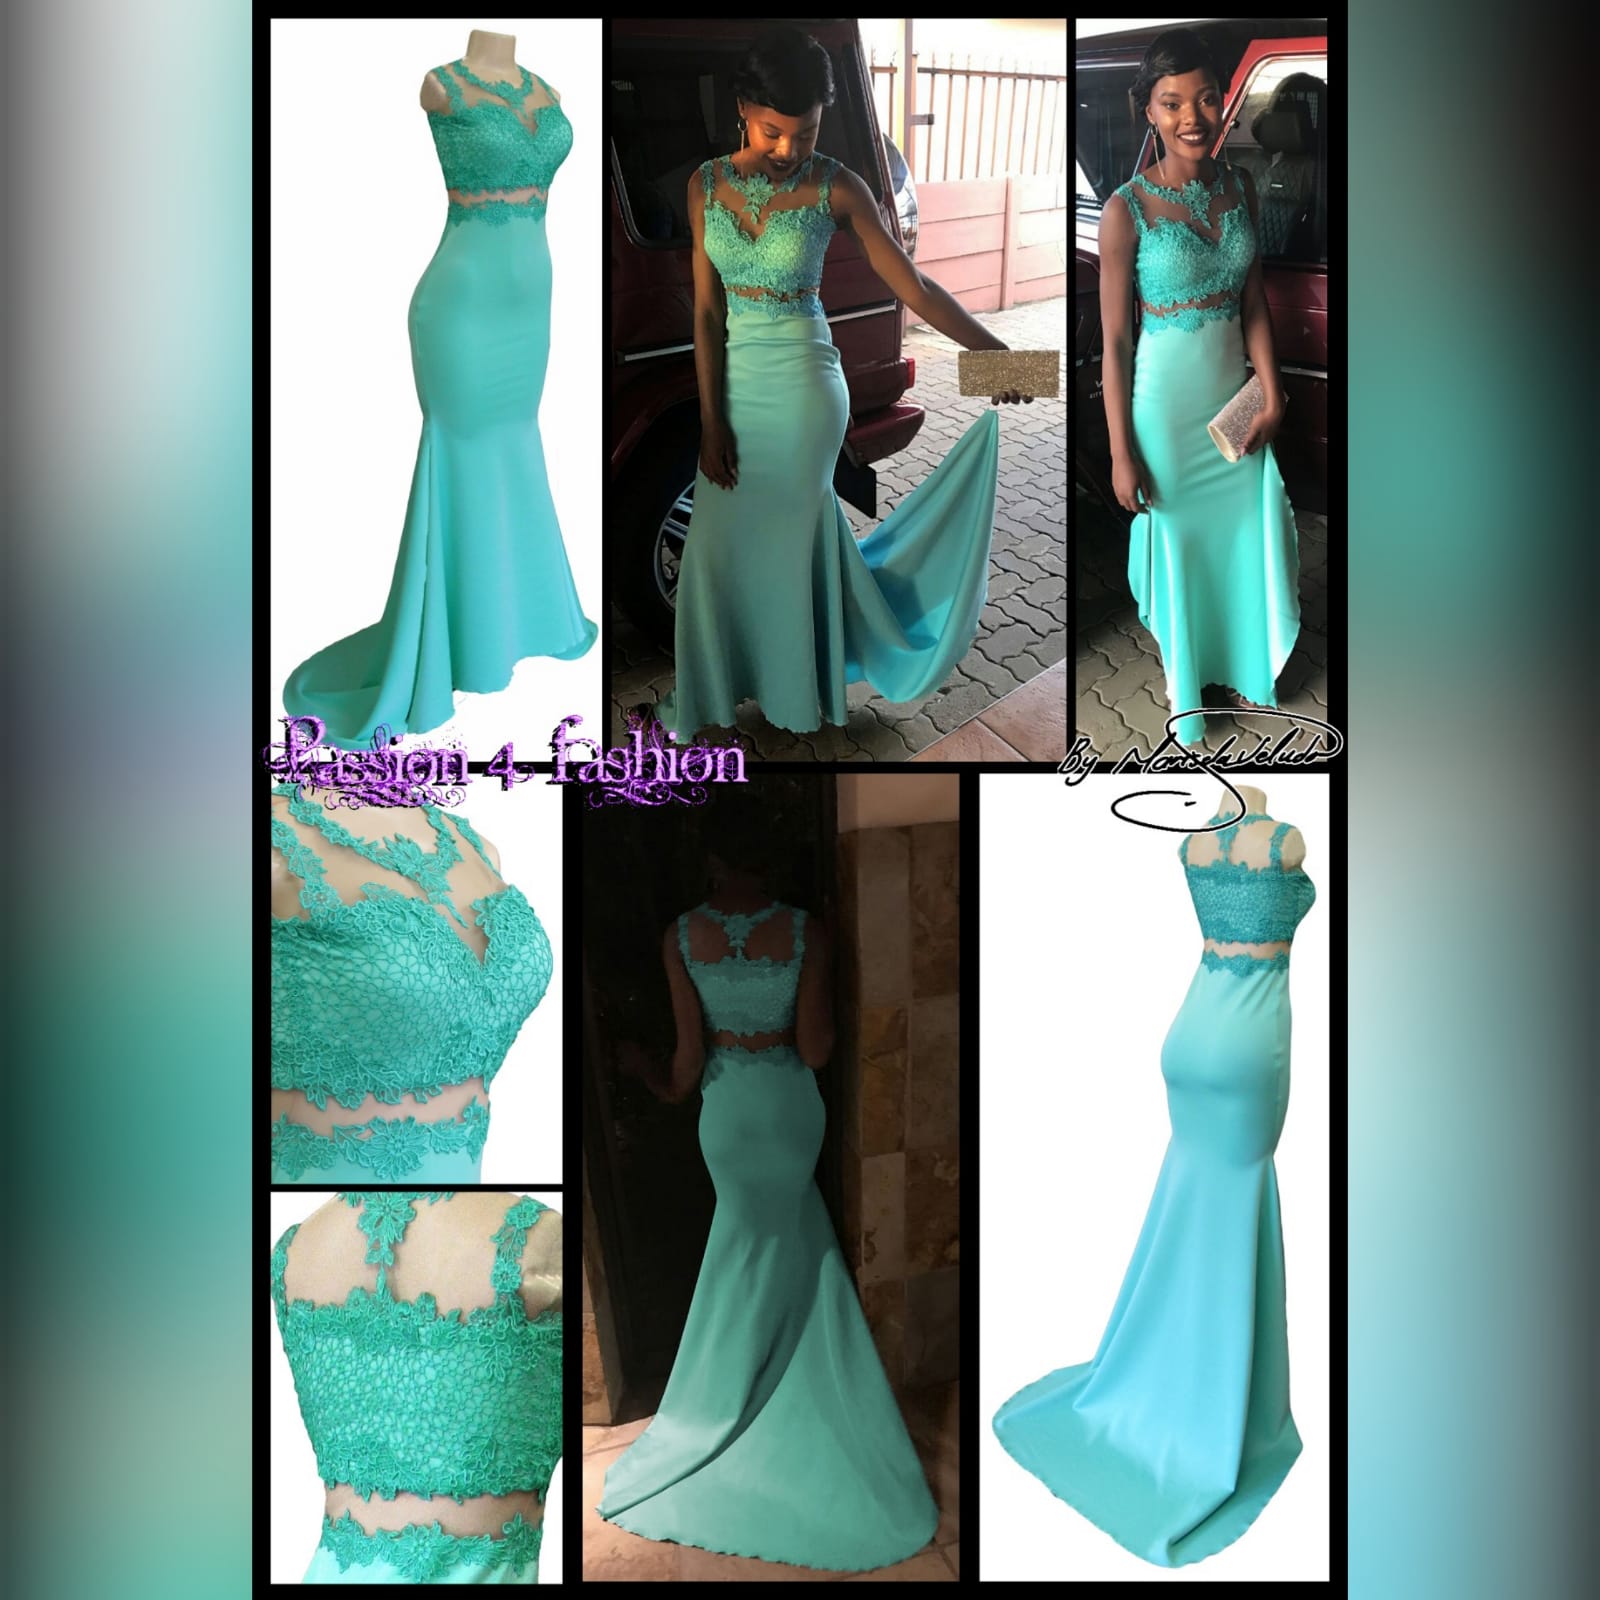 Illusion 2 piece mint green soft mermaid prom dress 6 illusion 2 piece mint green soft mermaid prom dress with a lace bodice and illusion lace neckline